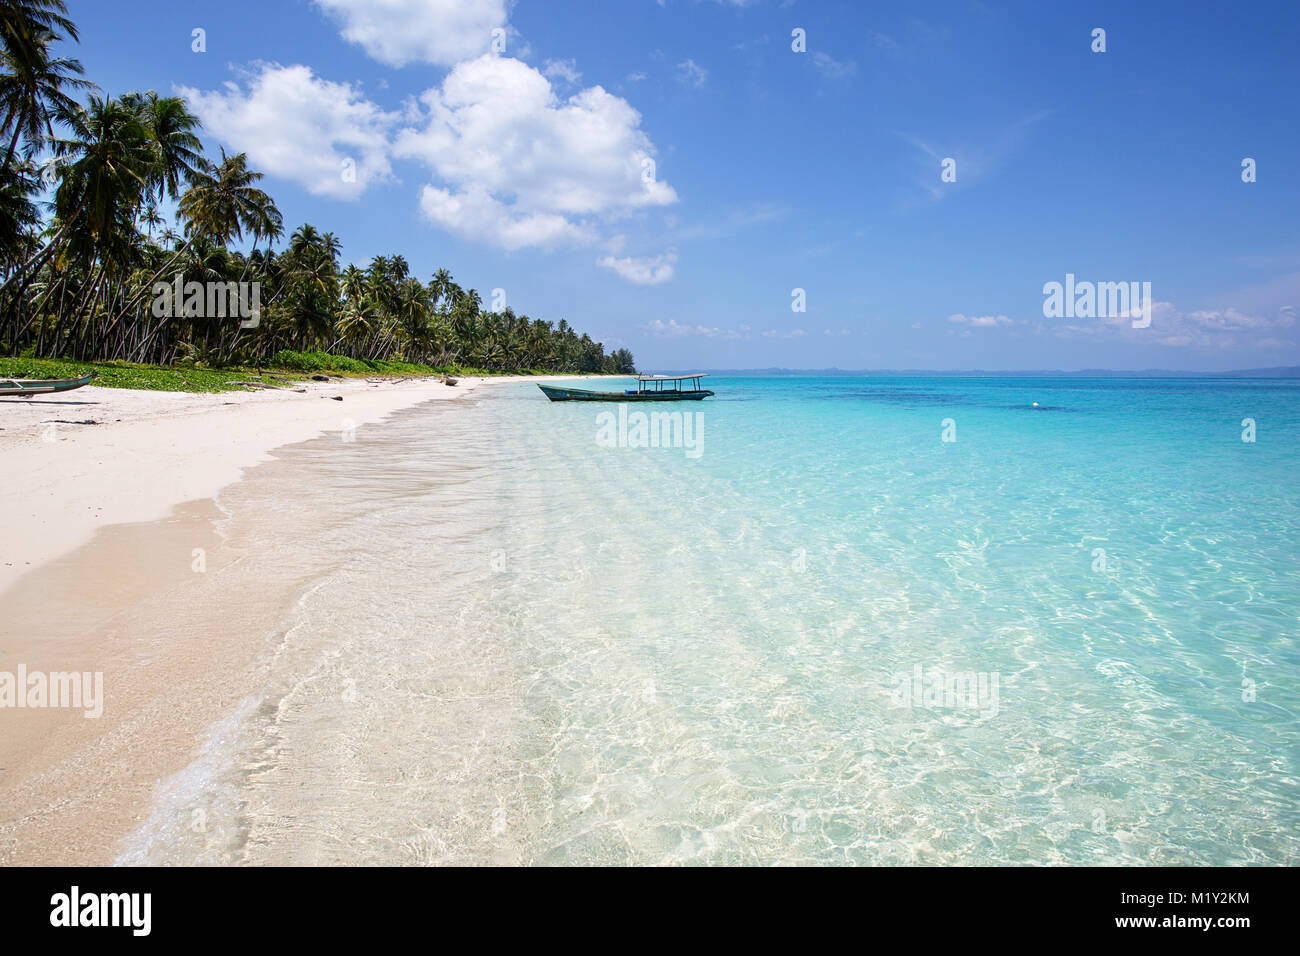 Beautiful tropical beach with crystal clear turquoise water and traditional boat Stock Photo